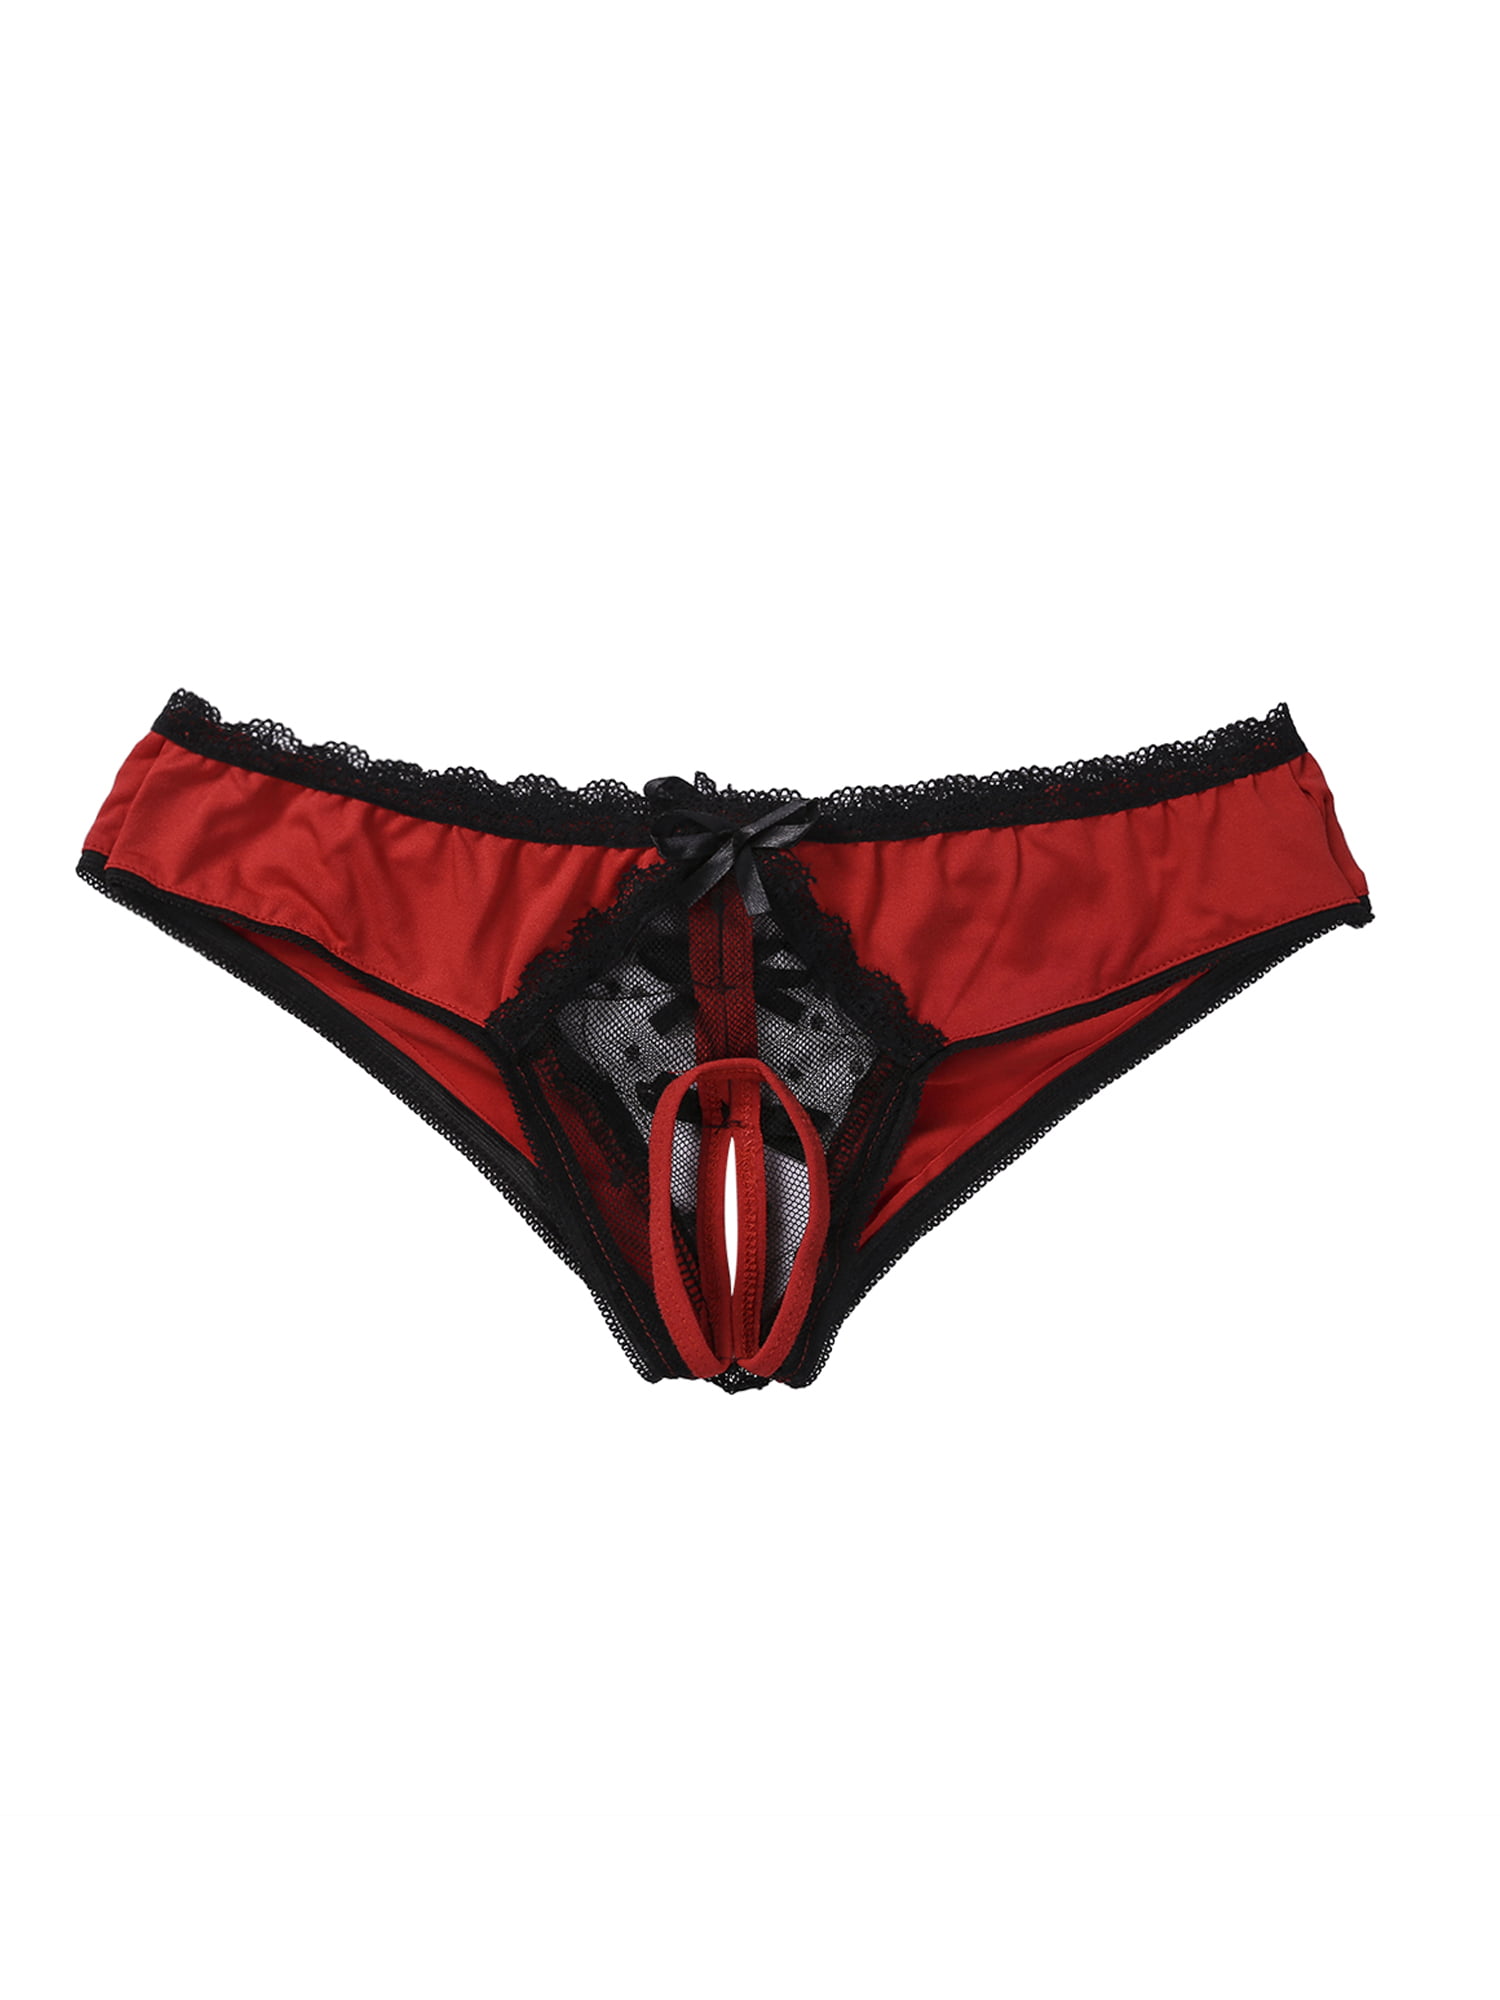 Calsunbaby Women Thongs Panties Open Crotch Crotchless Underwear Night  G-string L 